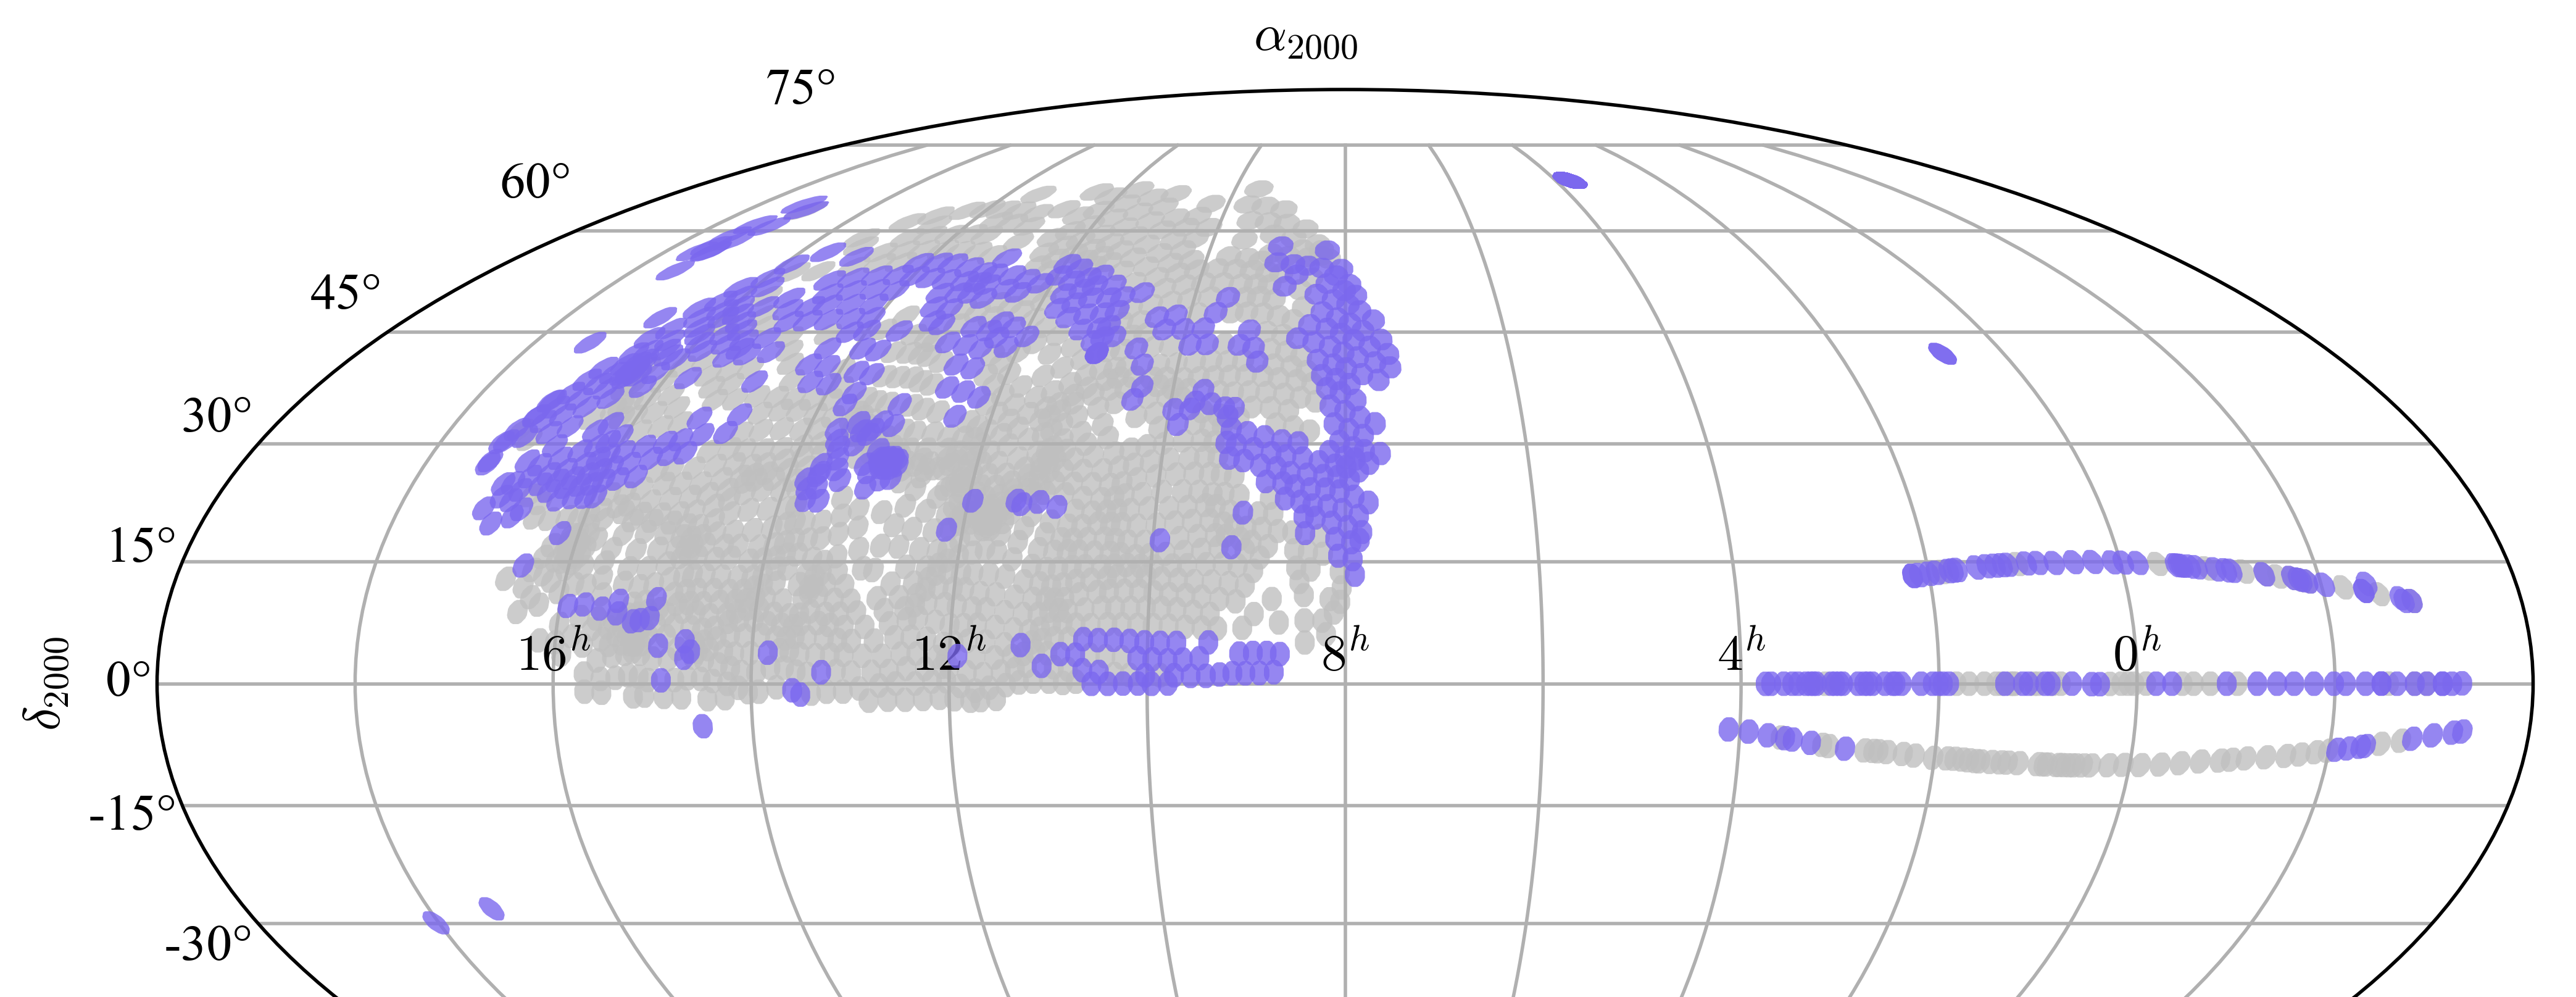 DR17 MaNGA spectroscopic coverage in Equatorial coordinates. Grey shows potential fields (tiles), while blue shows the observed plates included in DR17.